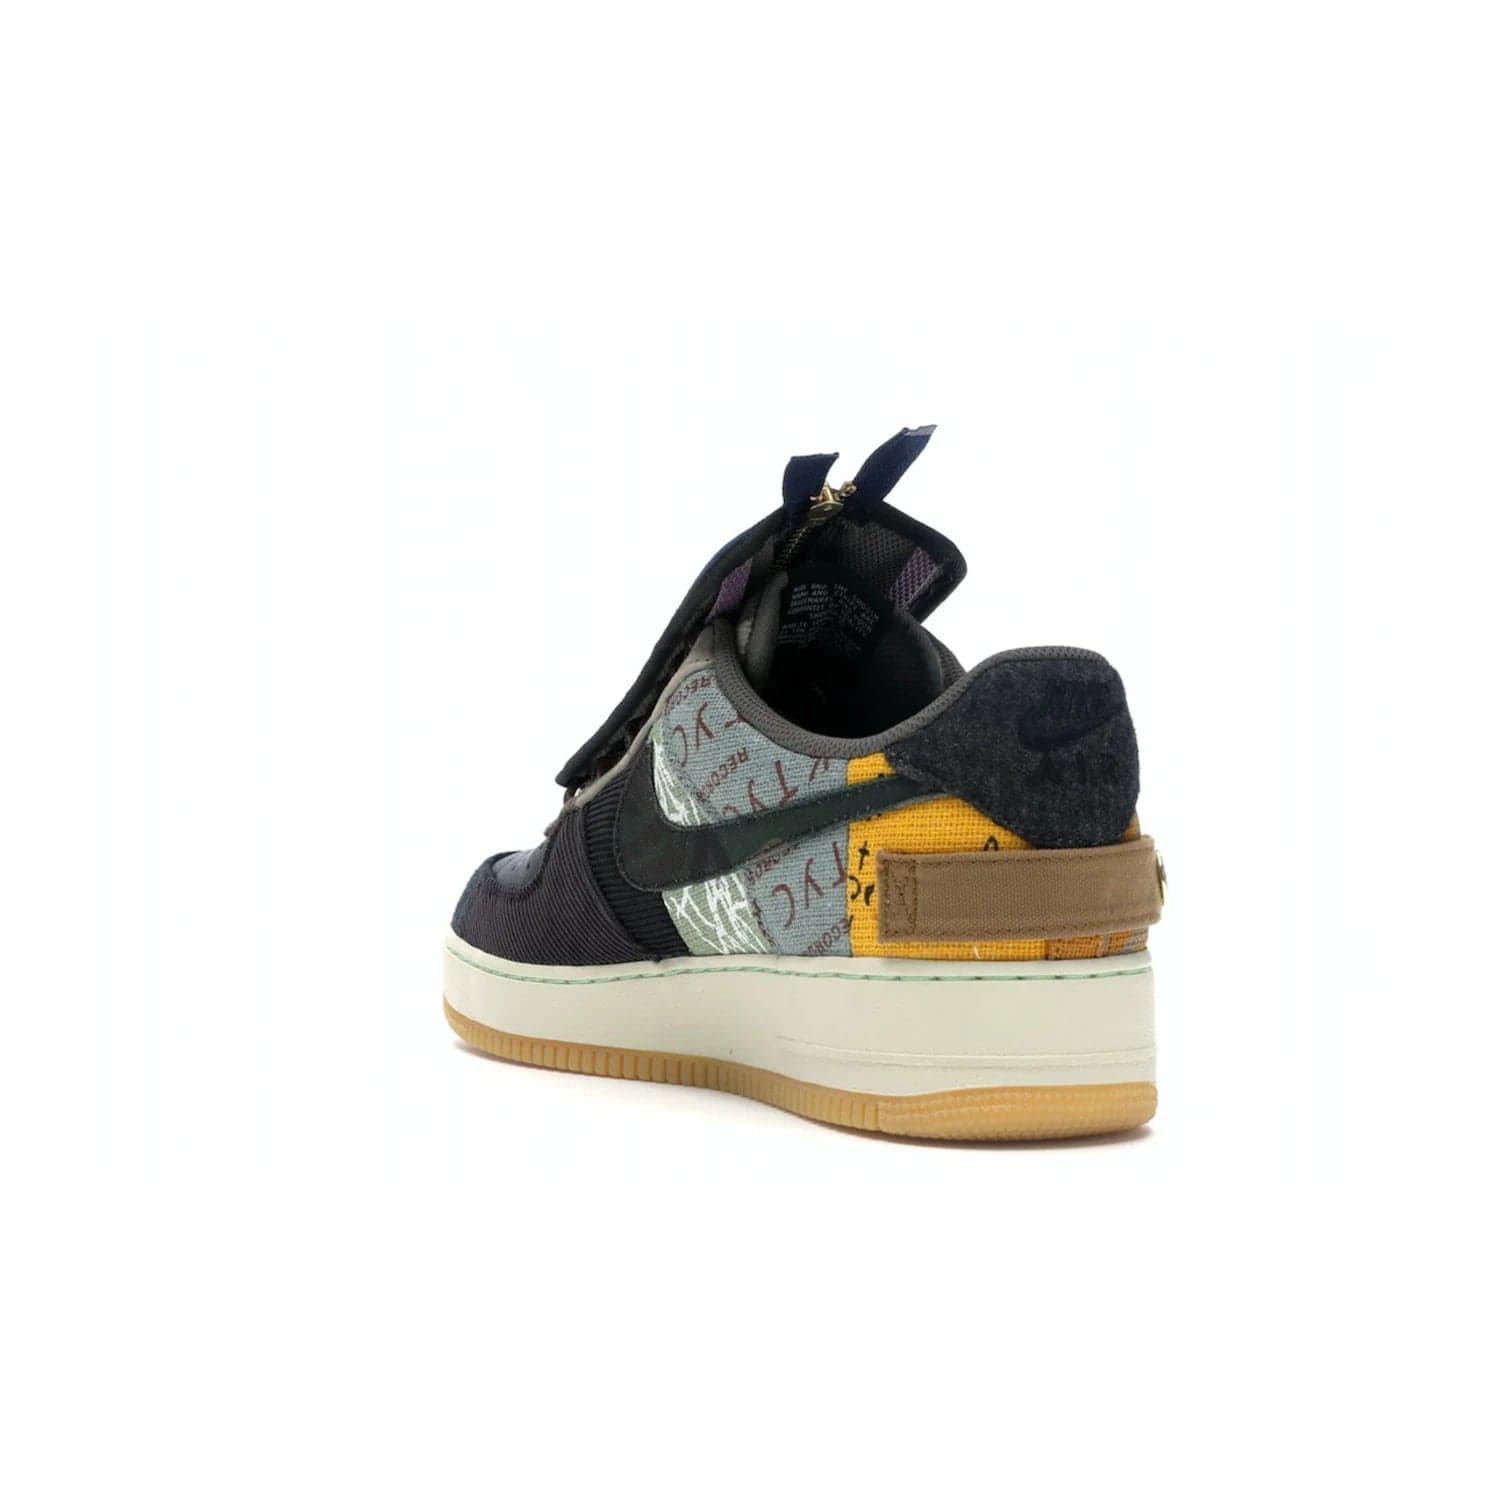 Nike Air Force 1 Low Travis Scott Cactus Jack - Image 25 - Only at www.BallersClubKickz.com - The Nike Air Force 1 Low Travis Scott Cactus Jack features a unique, multi-colored patchwork upper with muted bronze and fossil accents. Includes detachable lace cover, brass zipper, and Cactus Jack insignias. A sail midsole, gum rubber outsole complete the eye-catching design. Perfect for comfort and style with unexpected touches of detail.